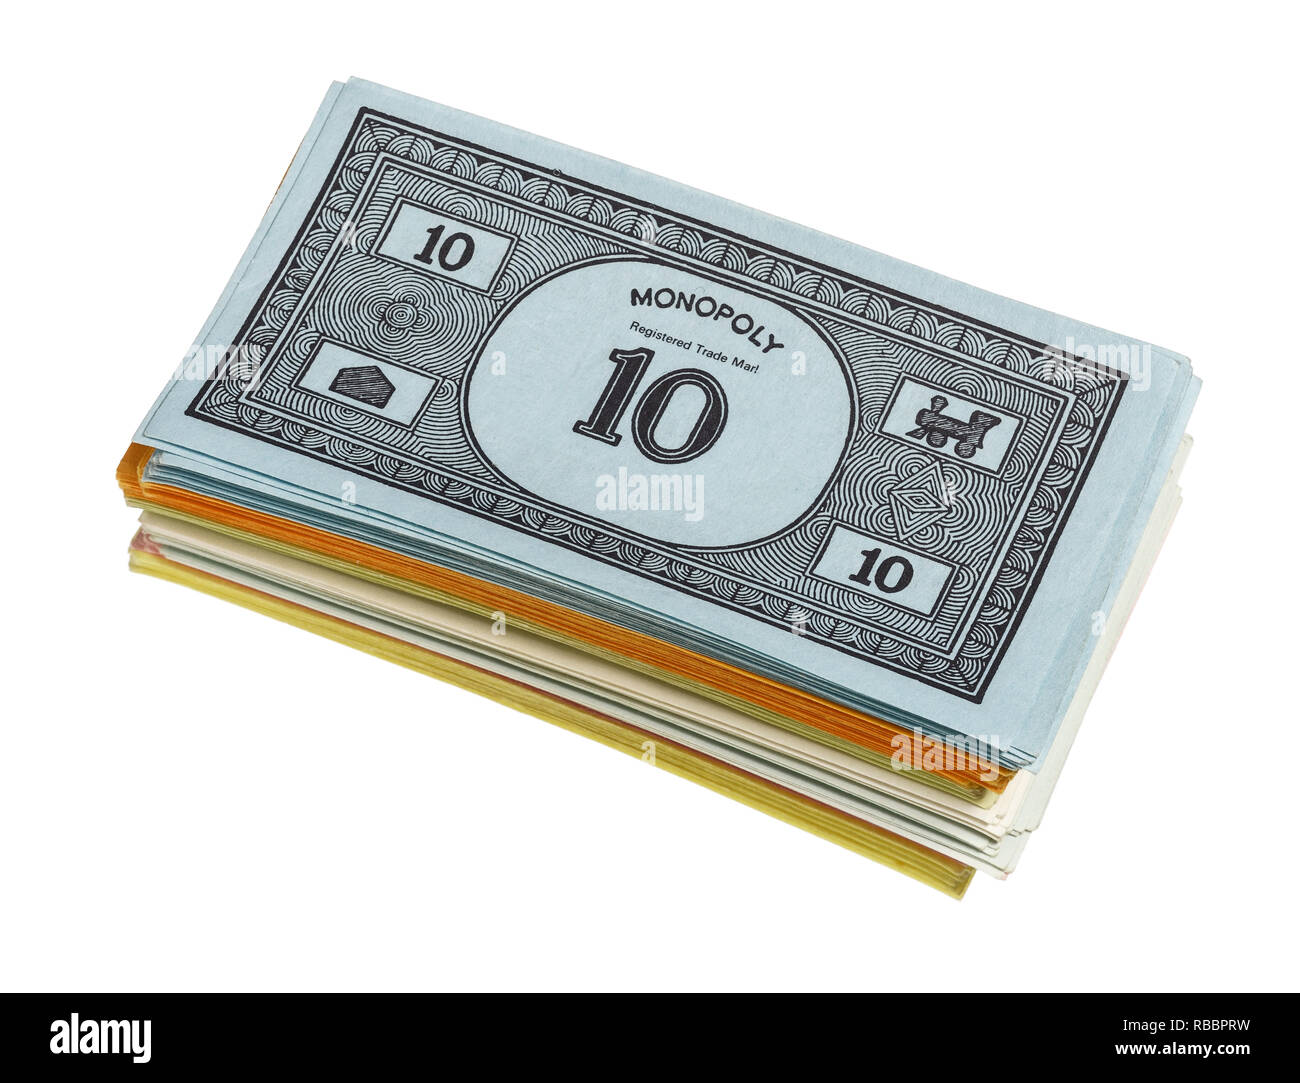 A pile of paper Monopoly money Stock Photo